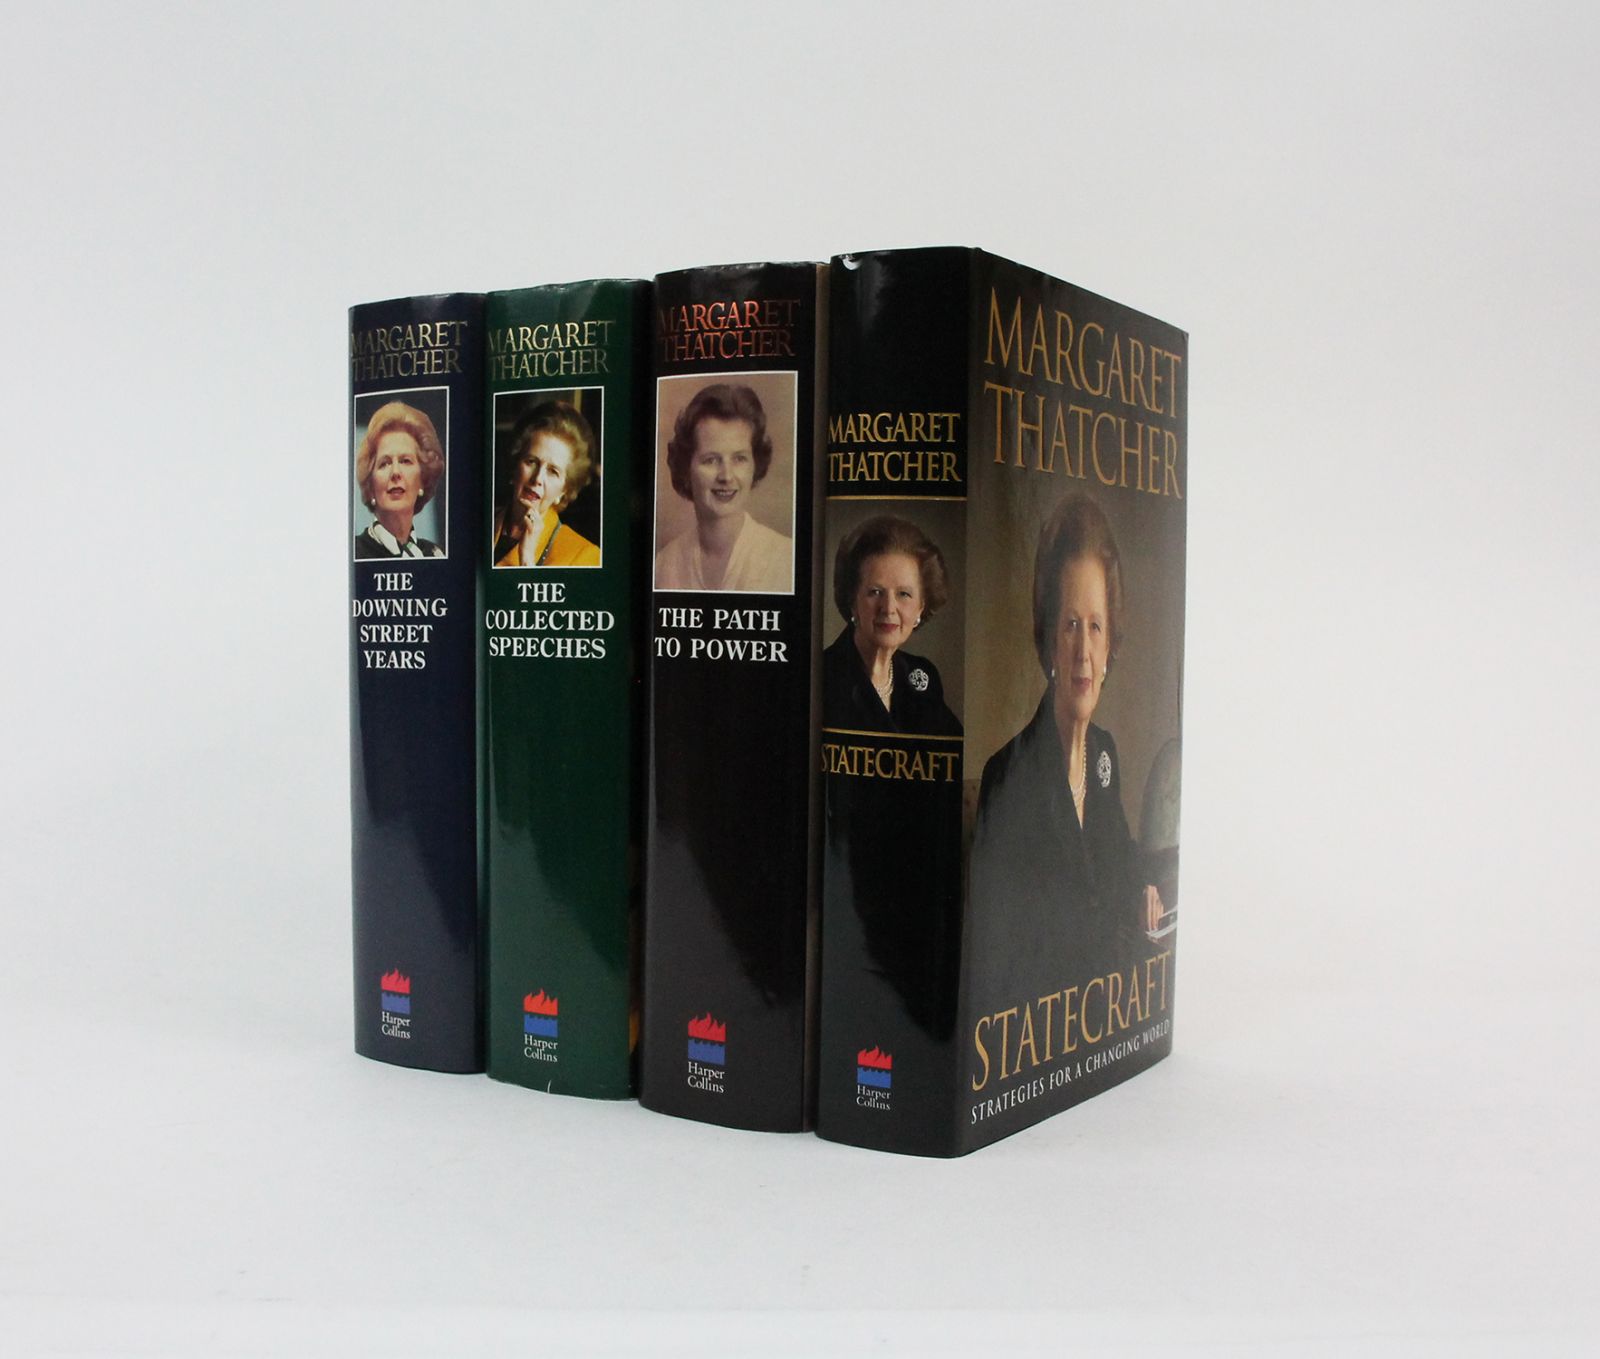 THE DOWNING STREET YEARS; THE PATH TO POWER; THE COLLECTED SPEECHES; STATECRAFT: Strategies for a Changing World; -  image 1